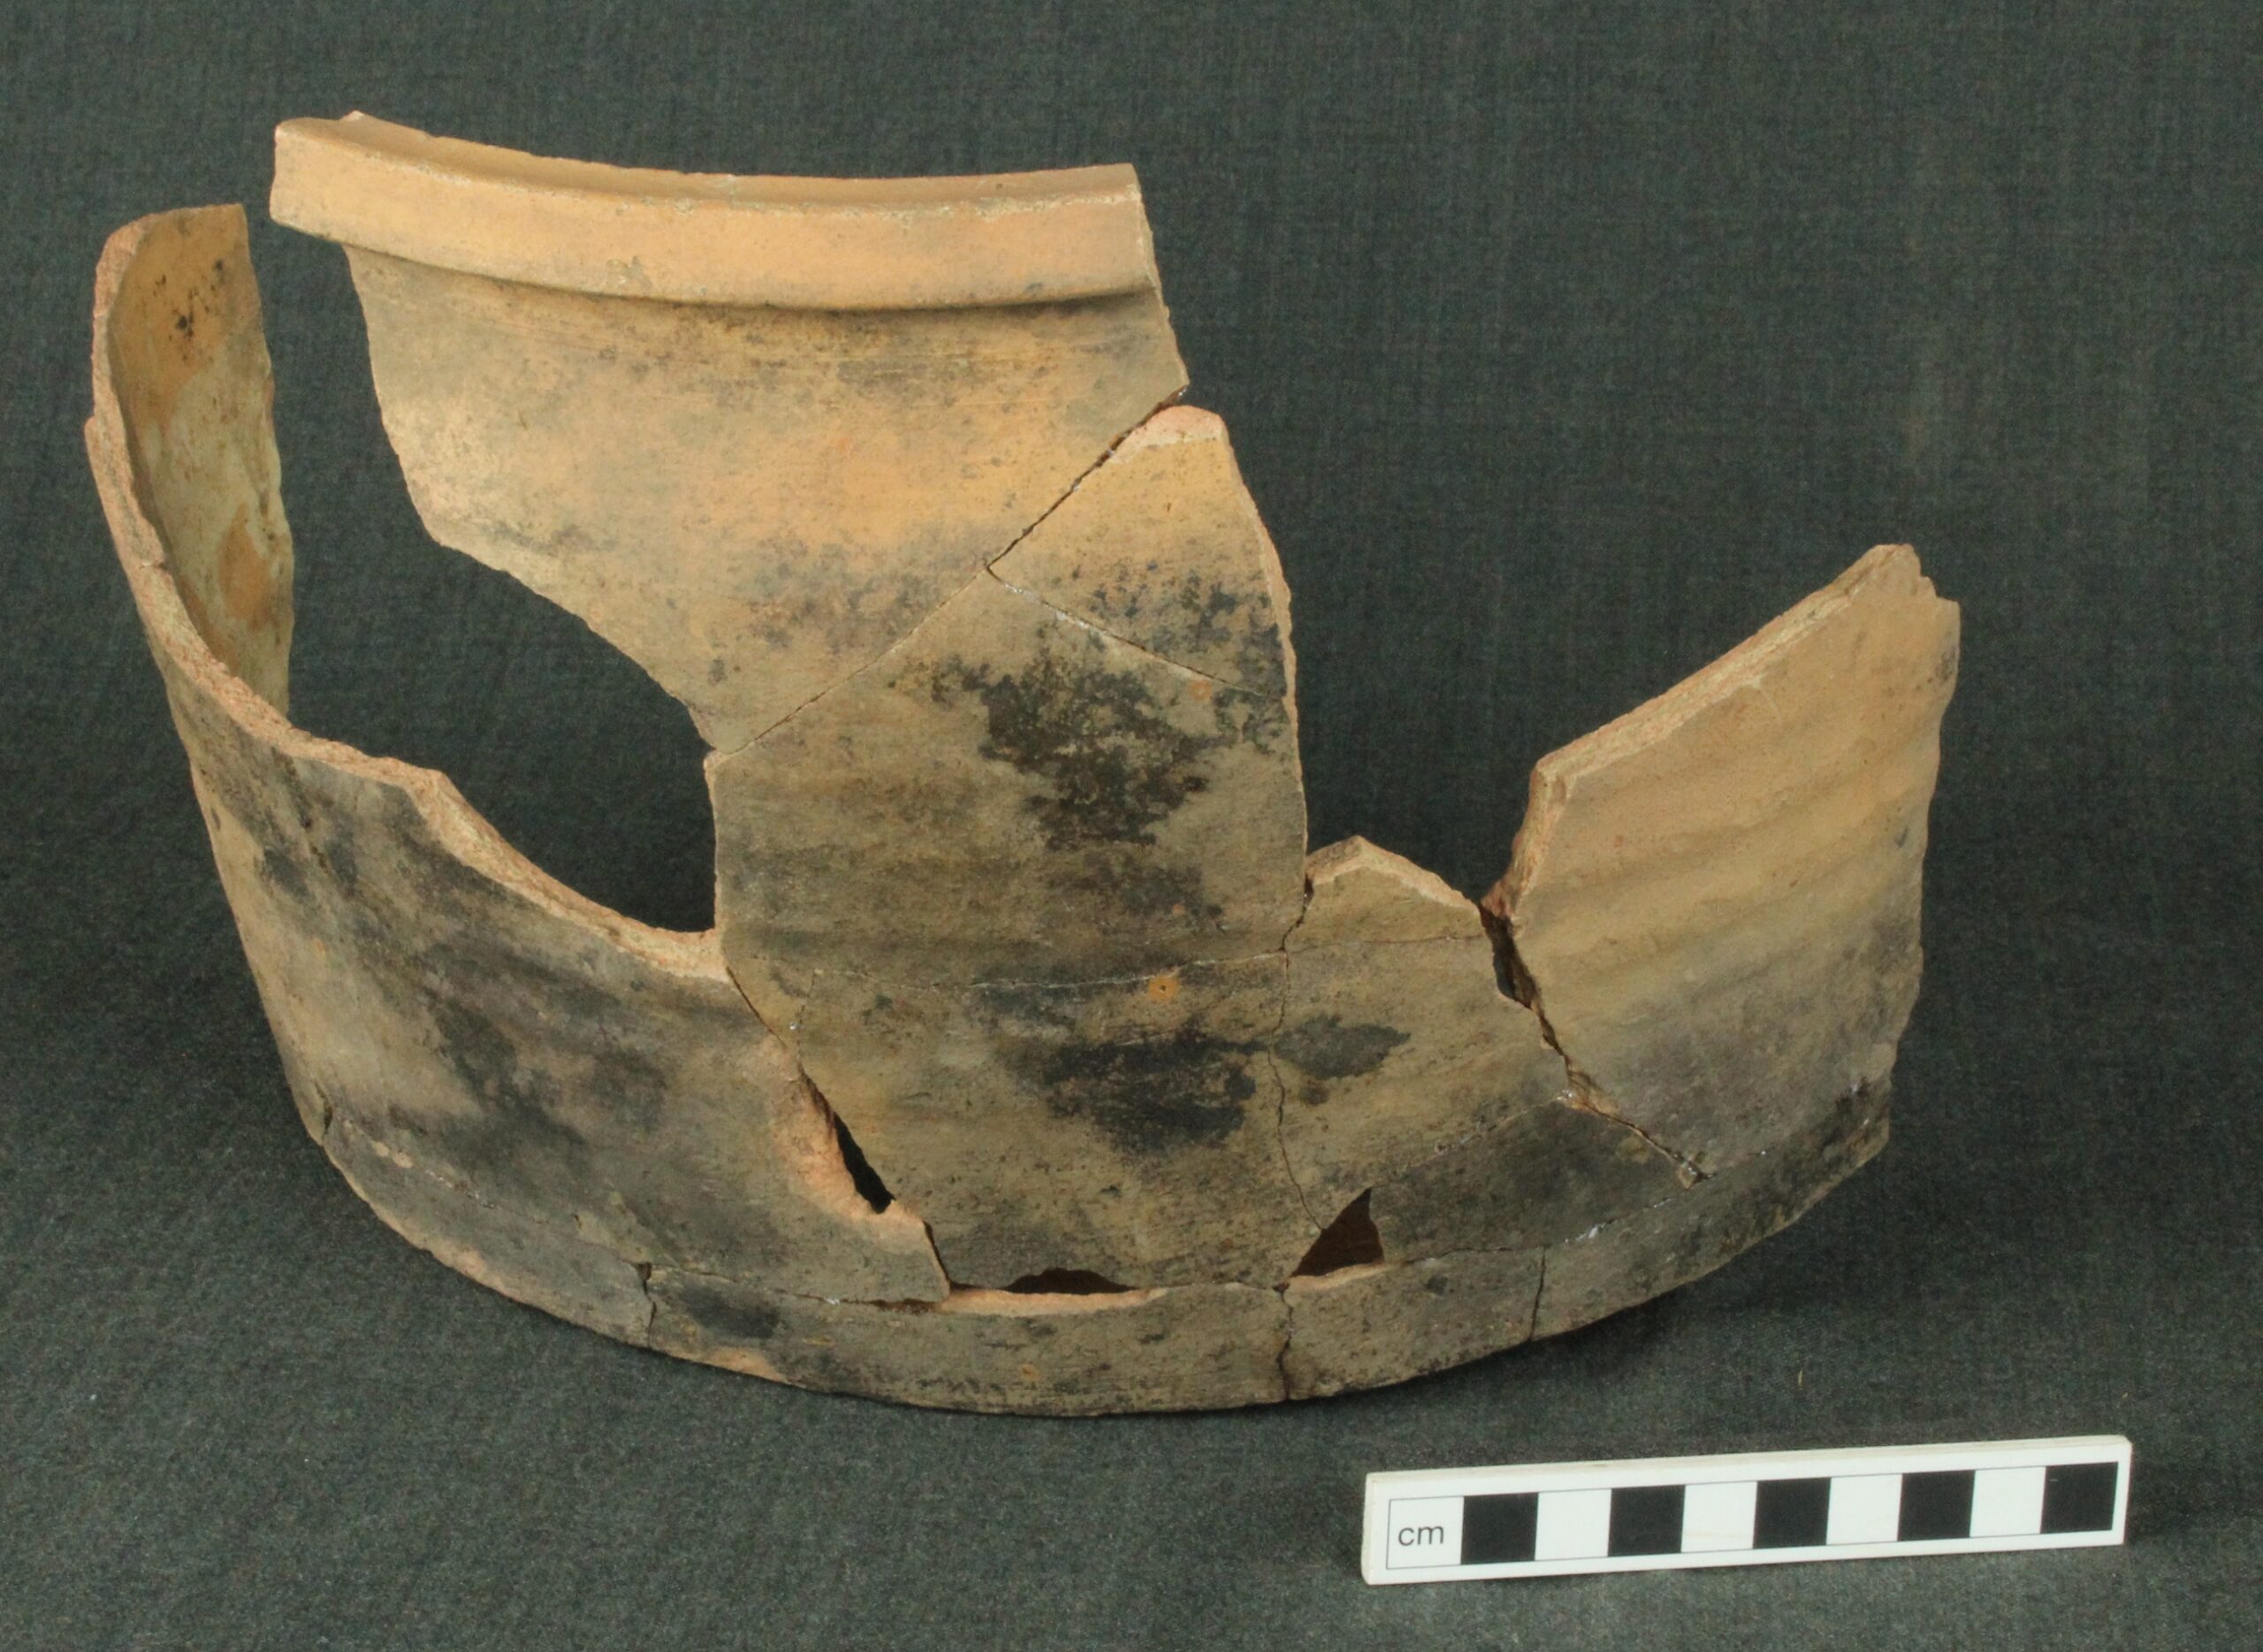 Sherds of a large pot, rejoined to show the original form